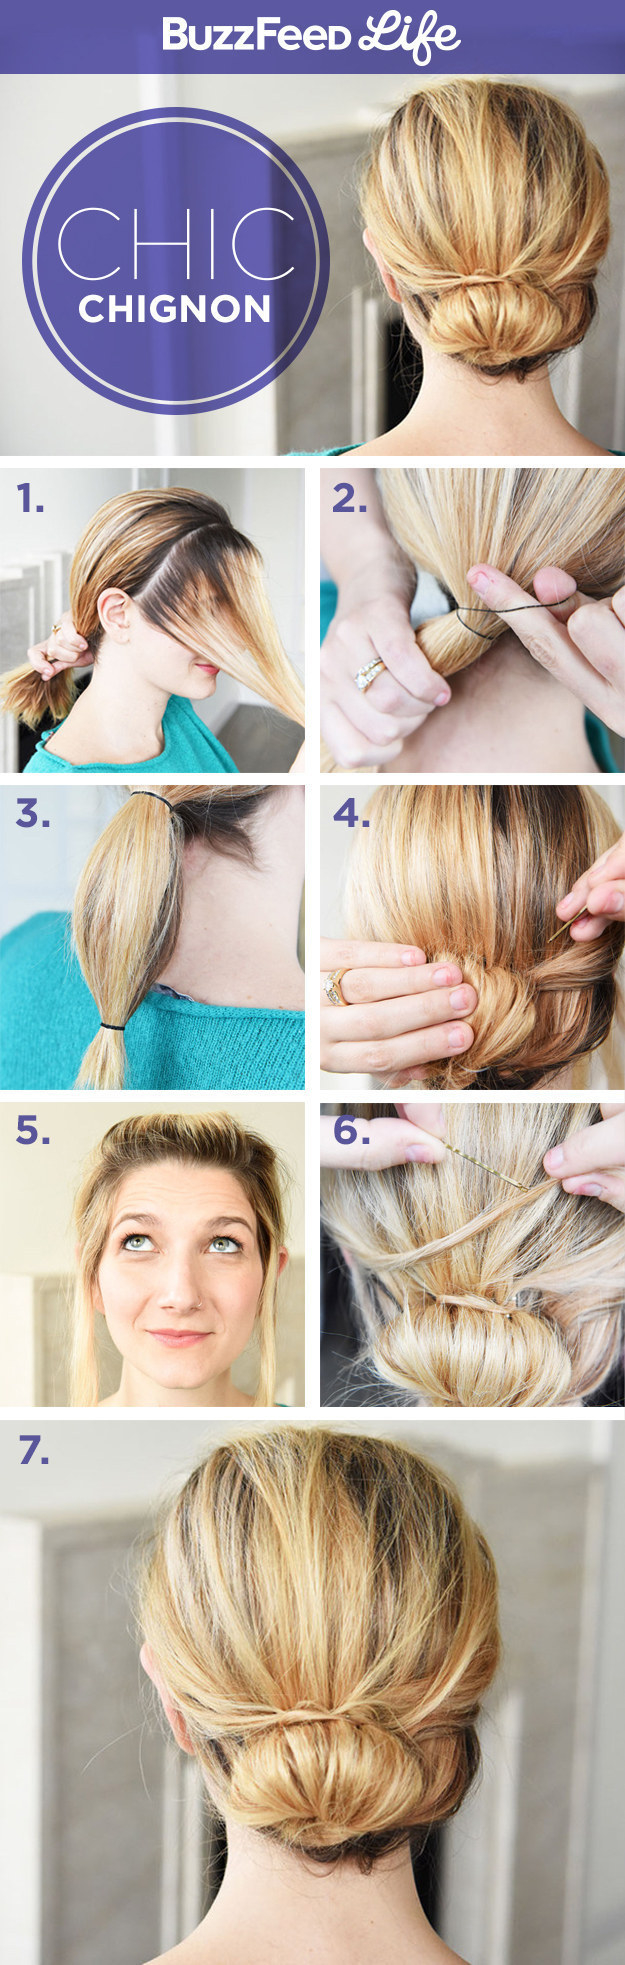 3 Easy 5 Minute Hairstyles - YouTube